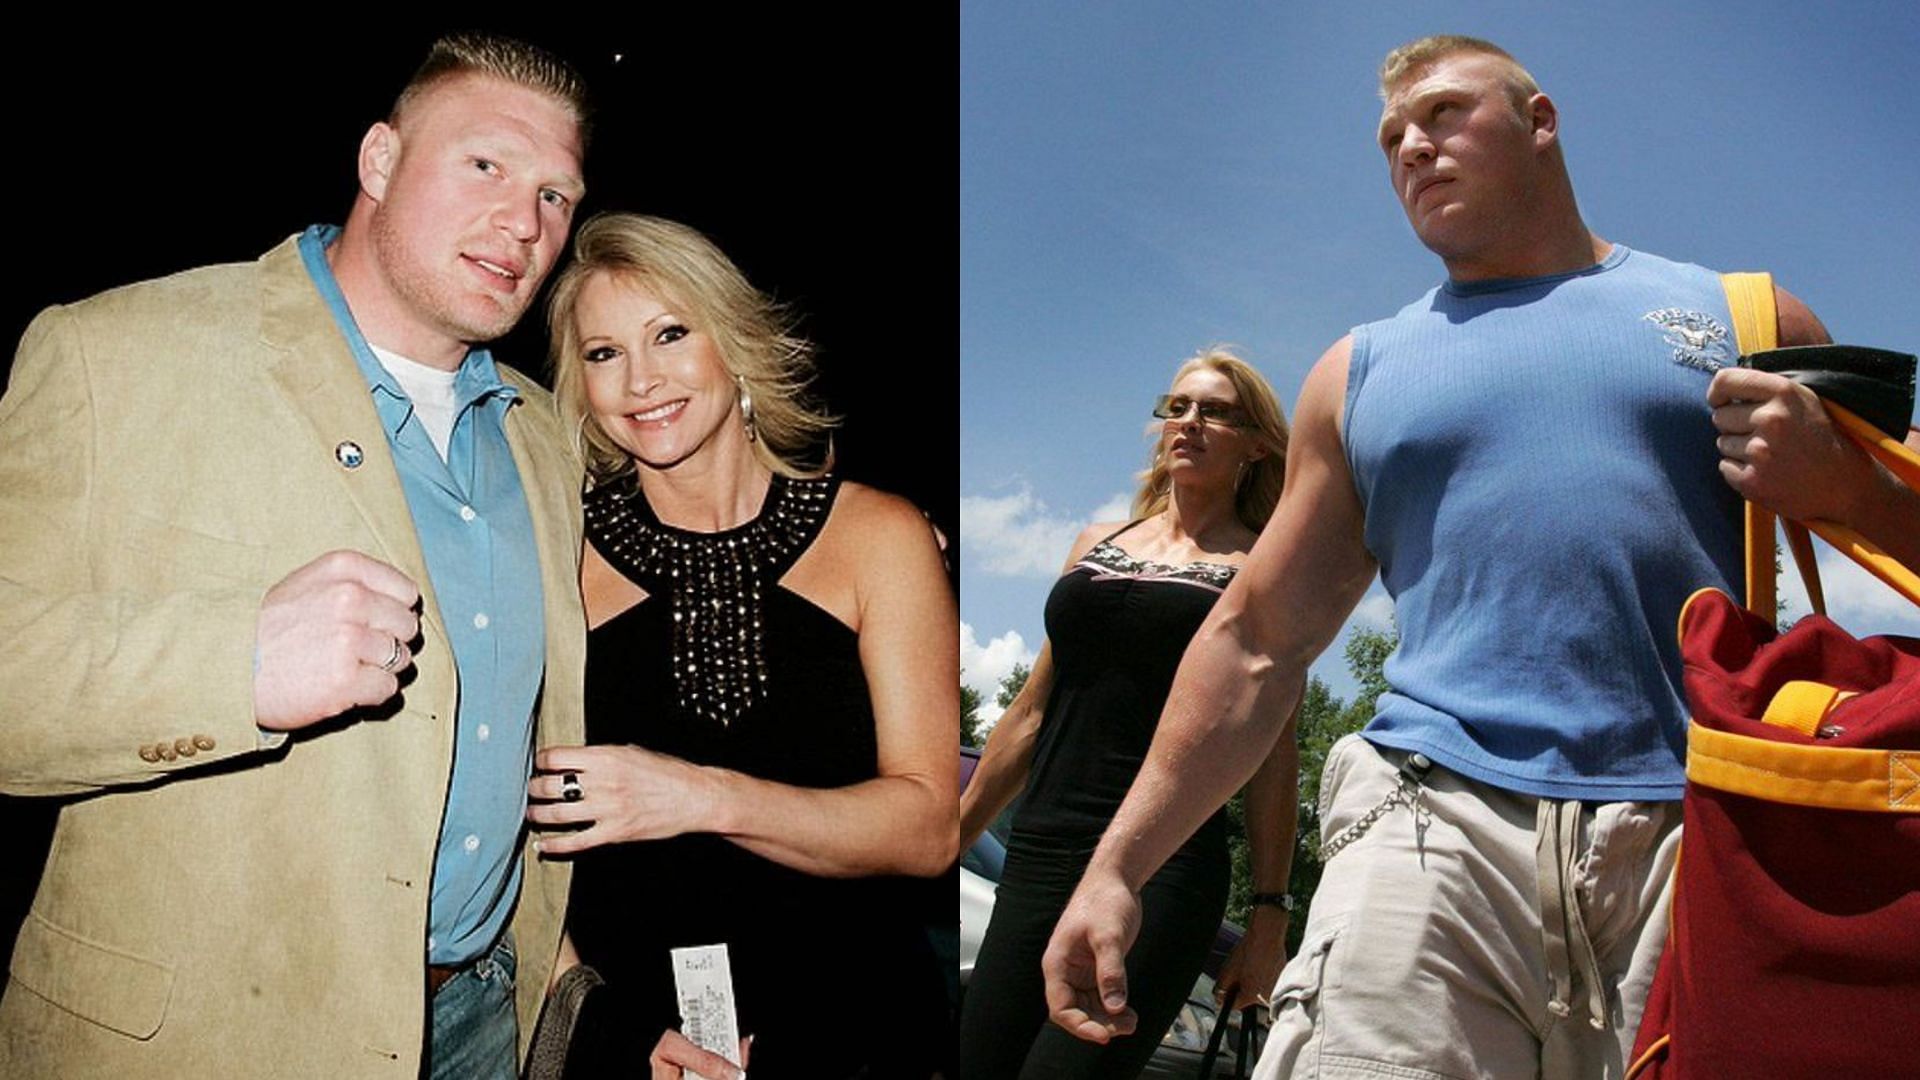 Brock Lesnar and Sable tied the knot in 2006